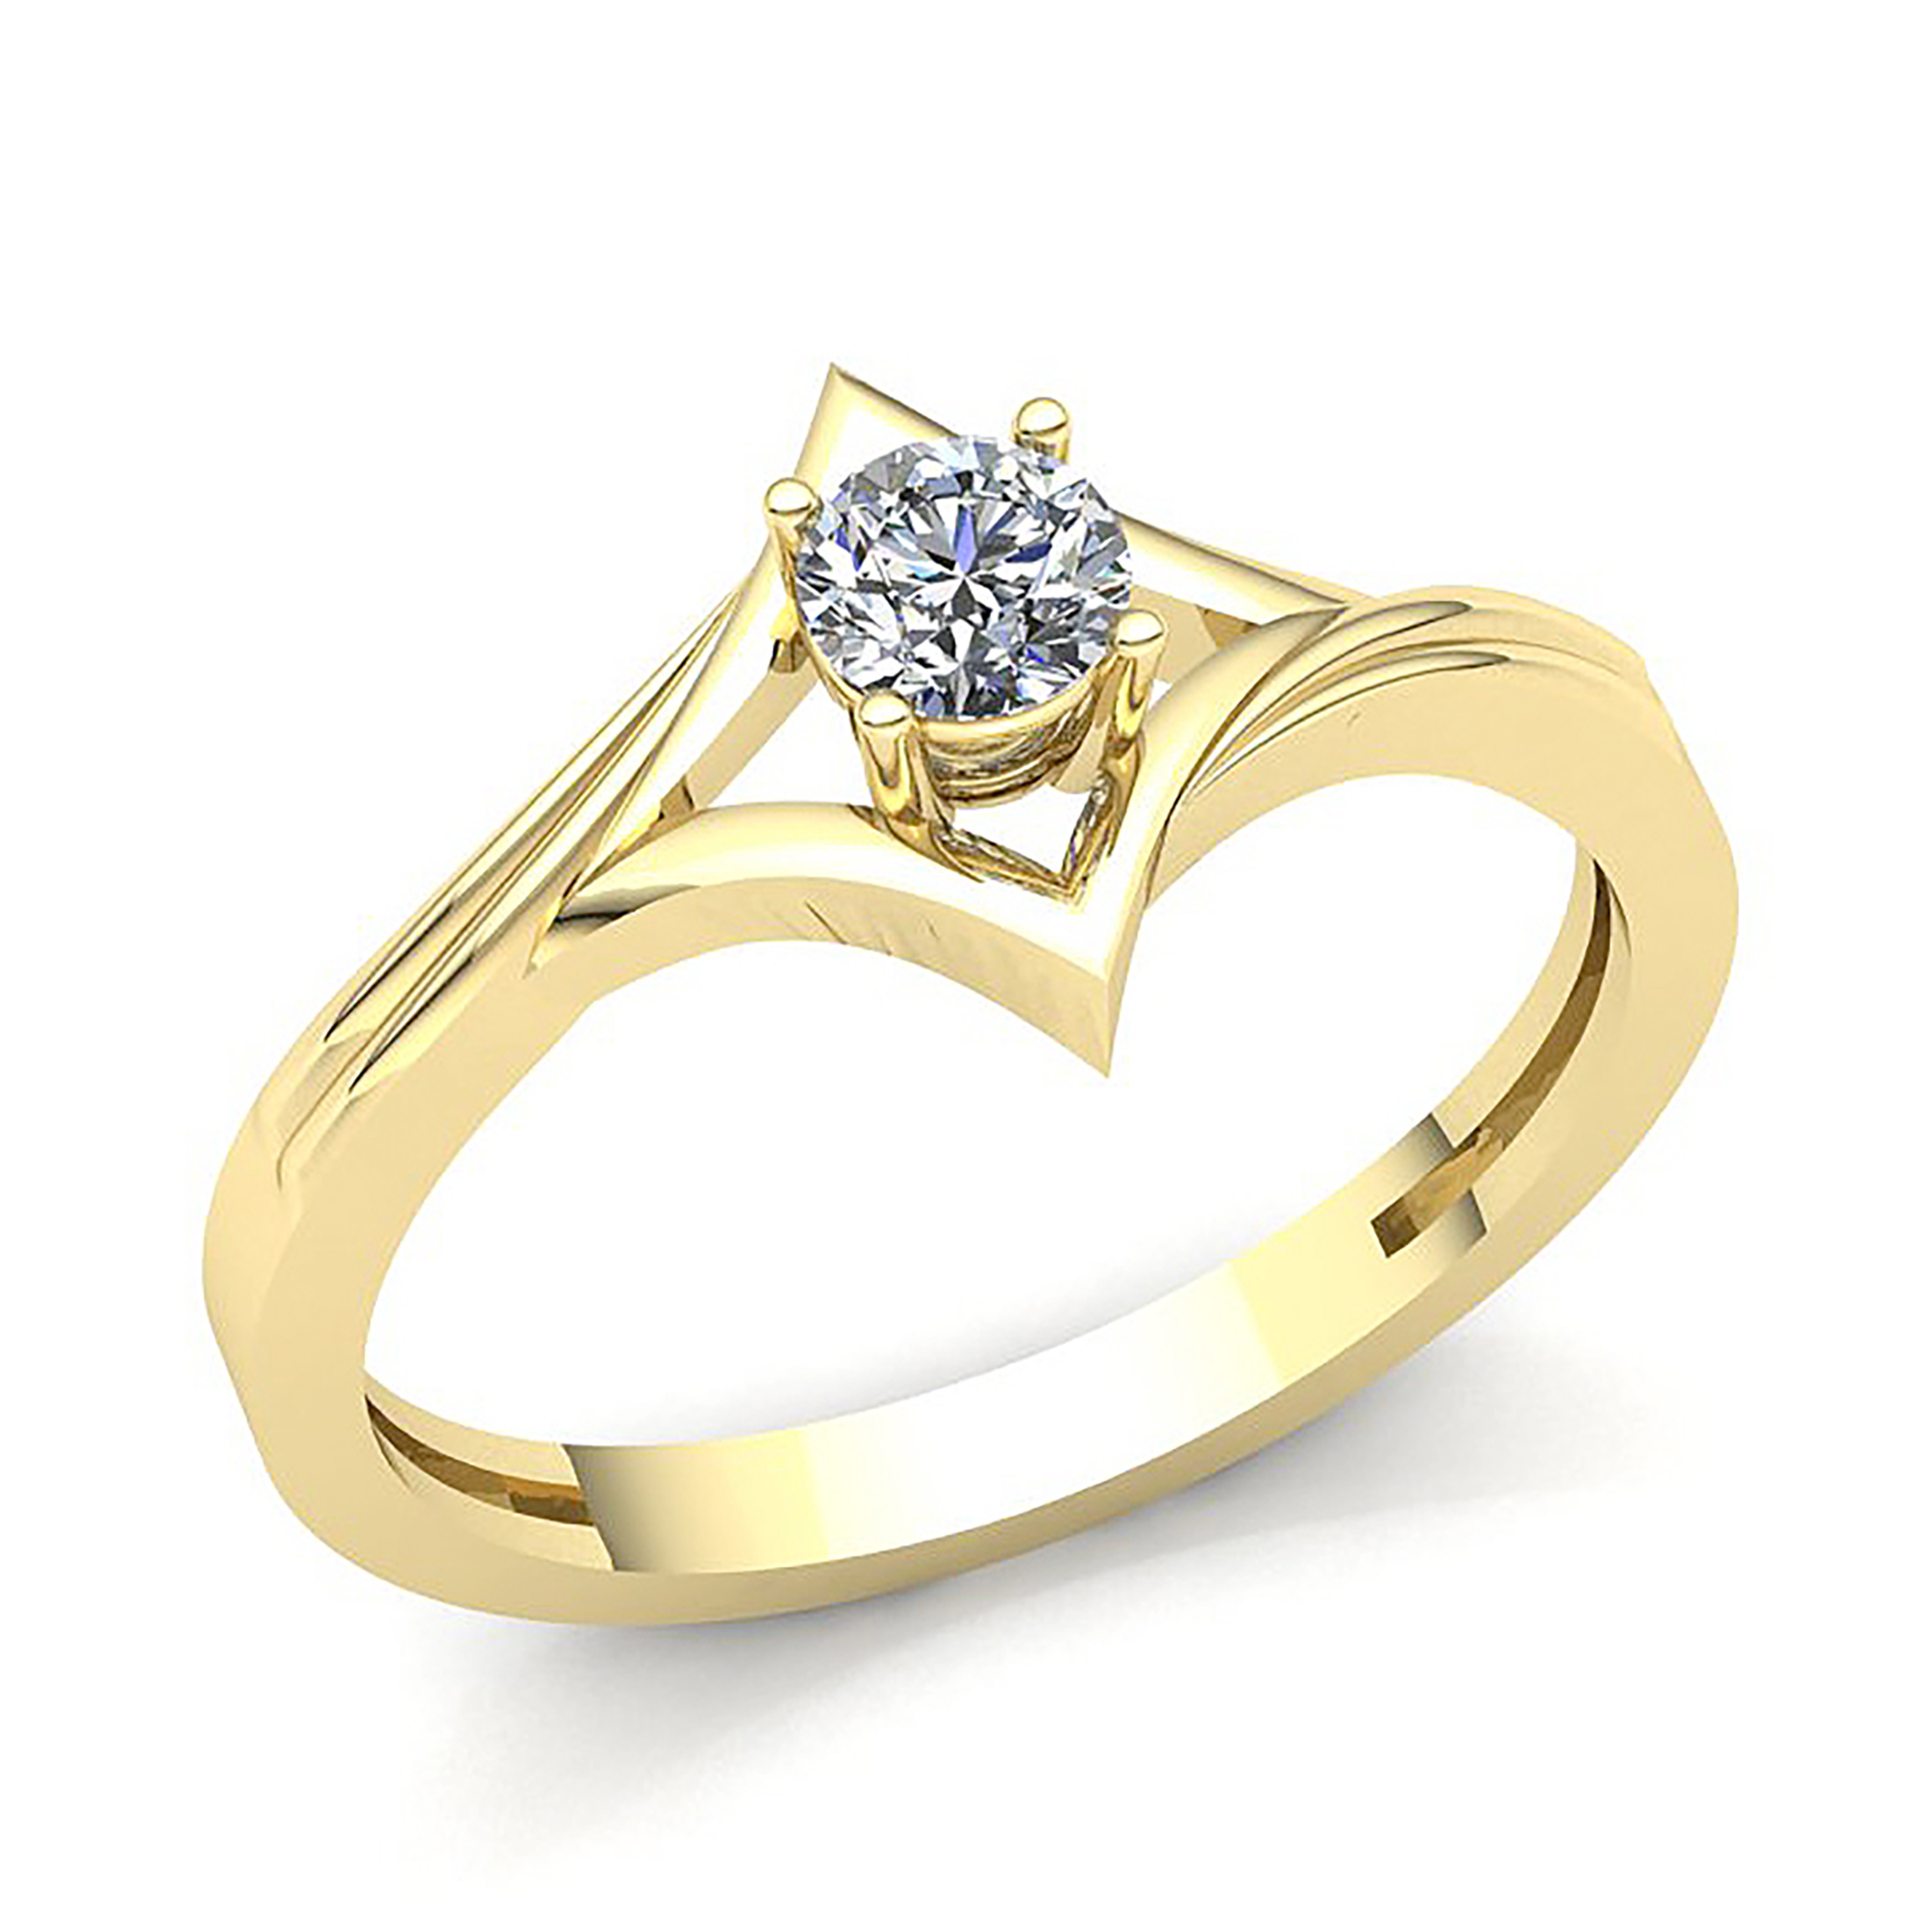 Marriage Engagement Latest Designs Of Gold Rings For Womens